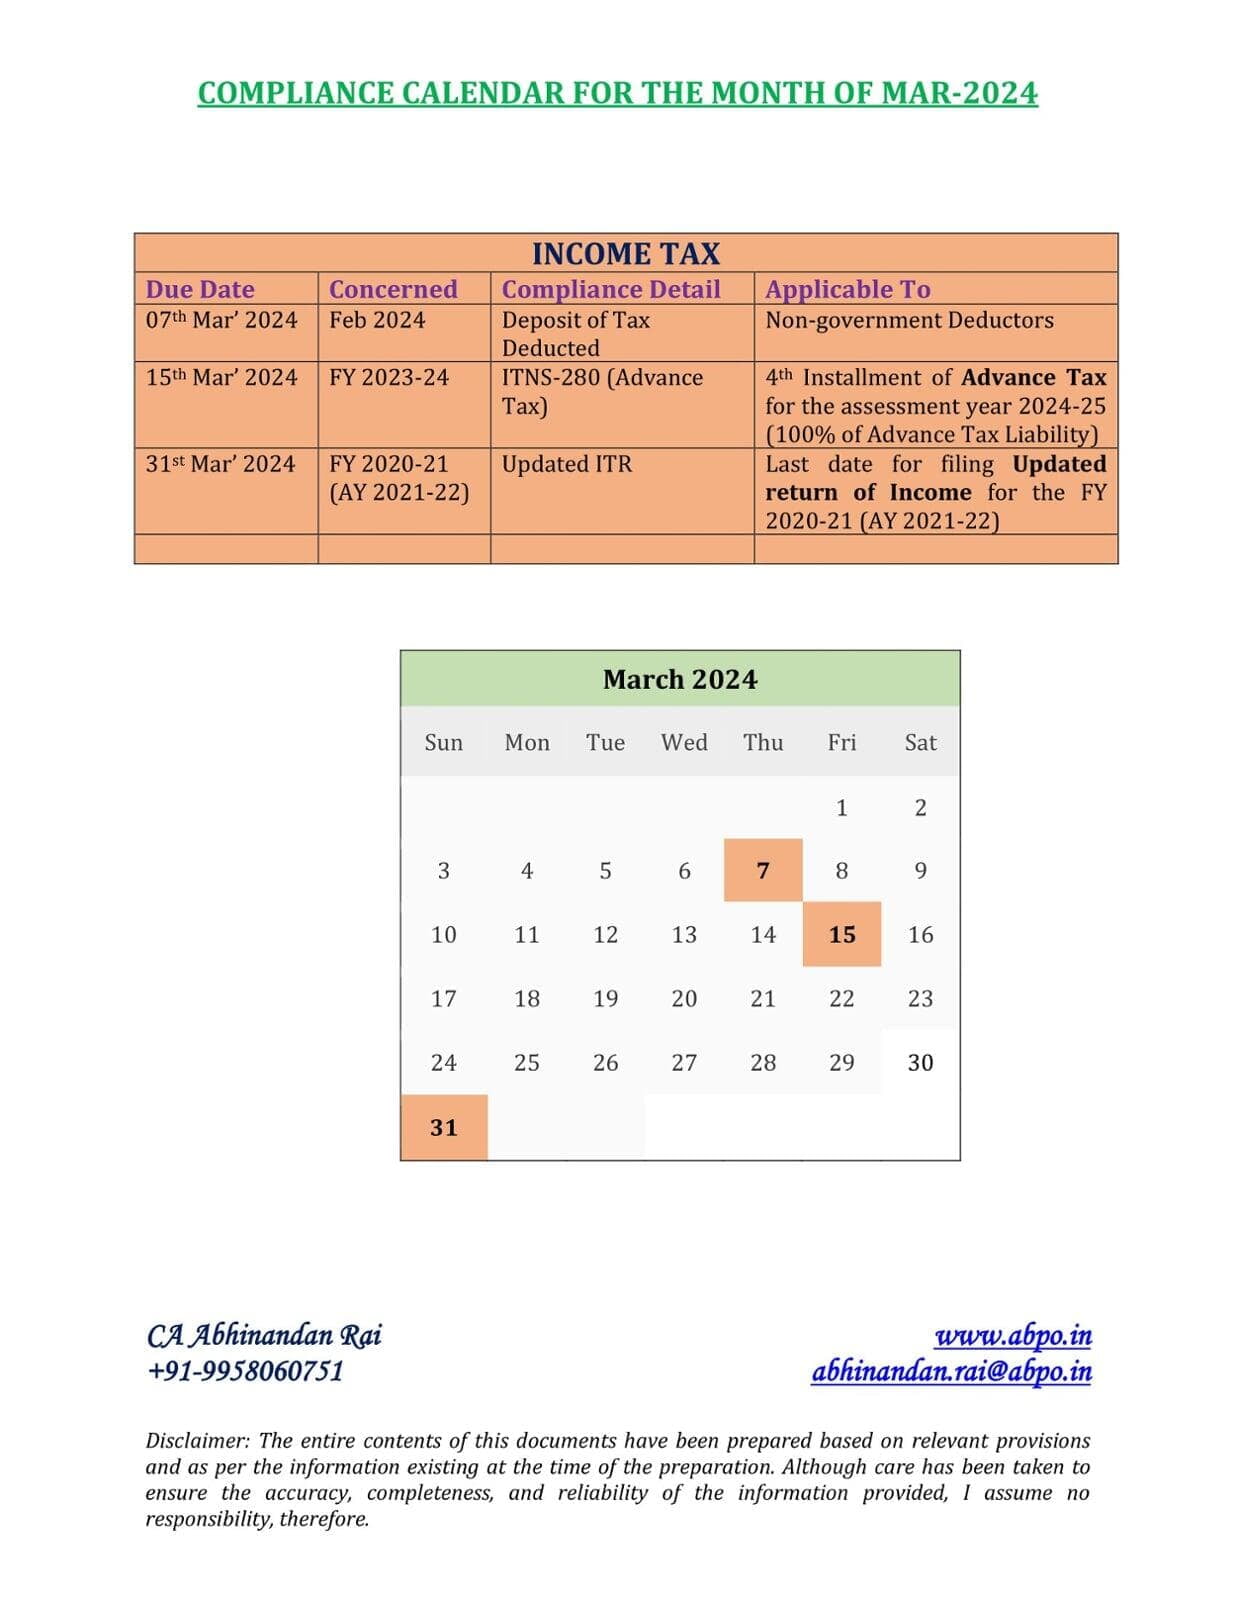 Due Date / Compliance Calendar for the Month of Mar' 2024 under GST, Income Tax Act and others